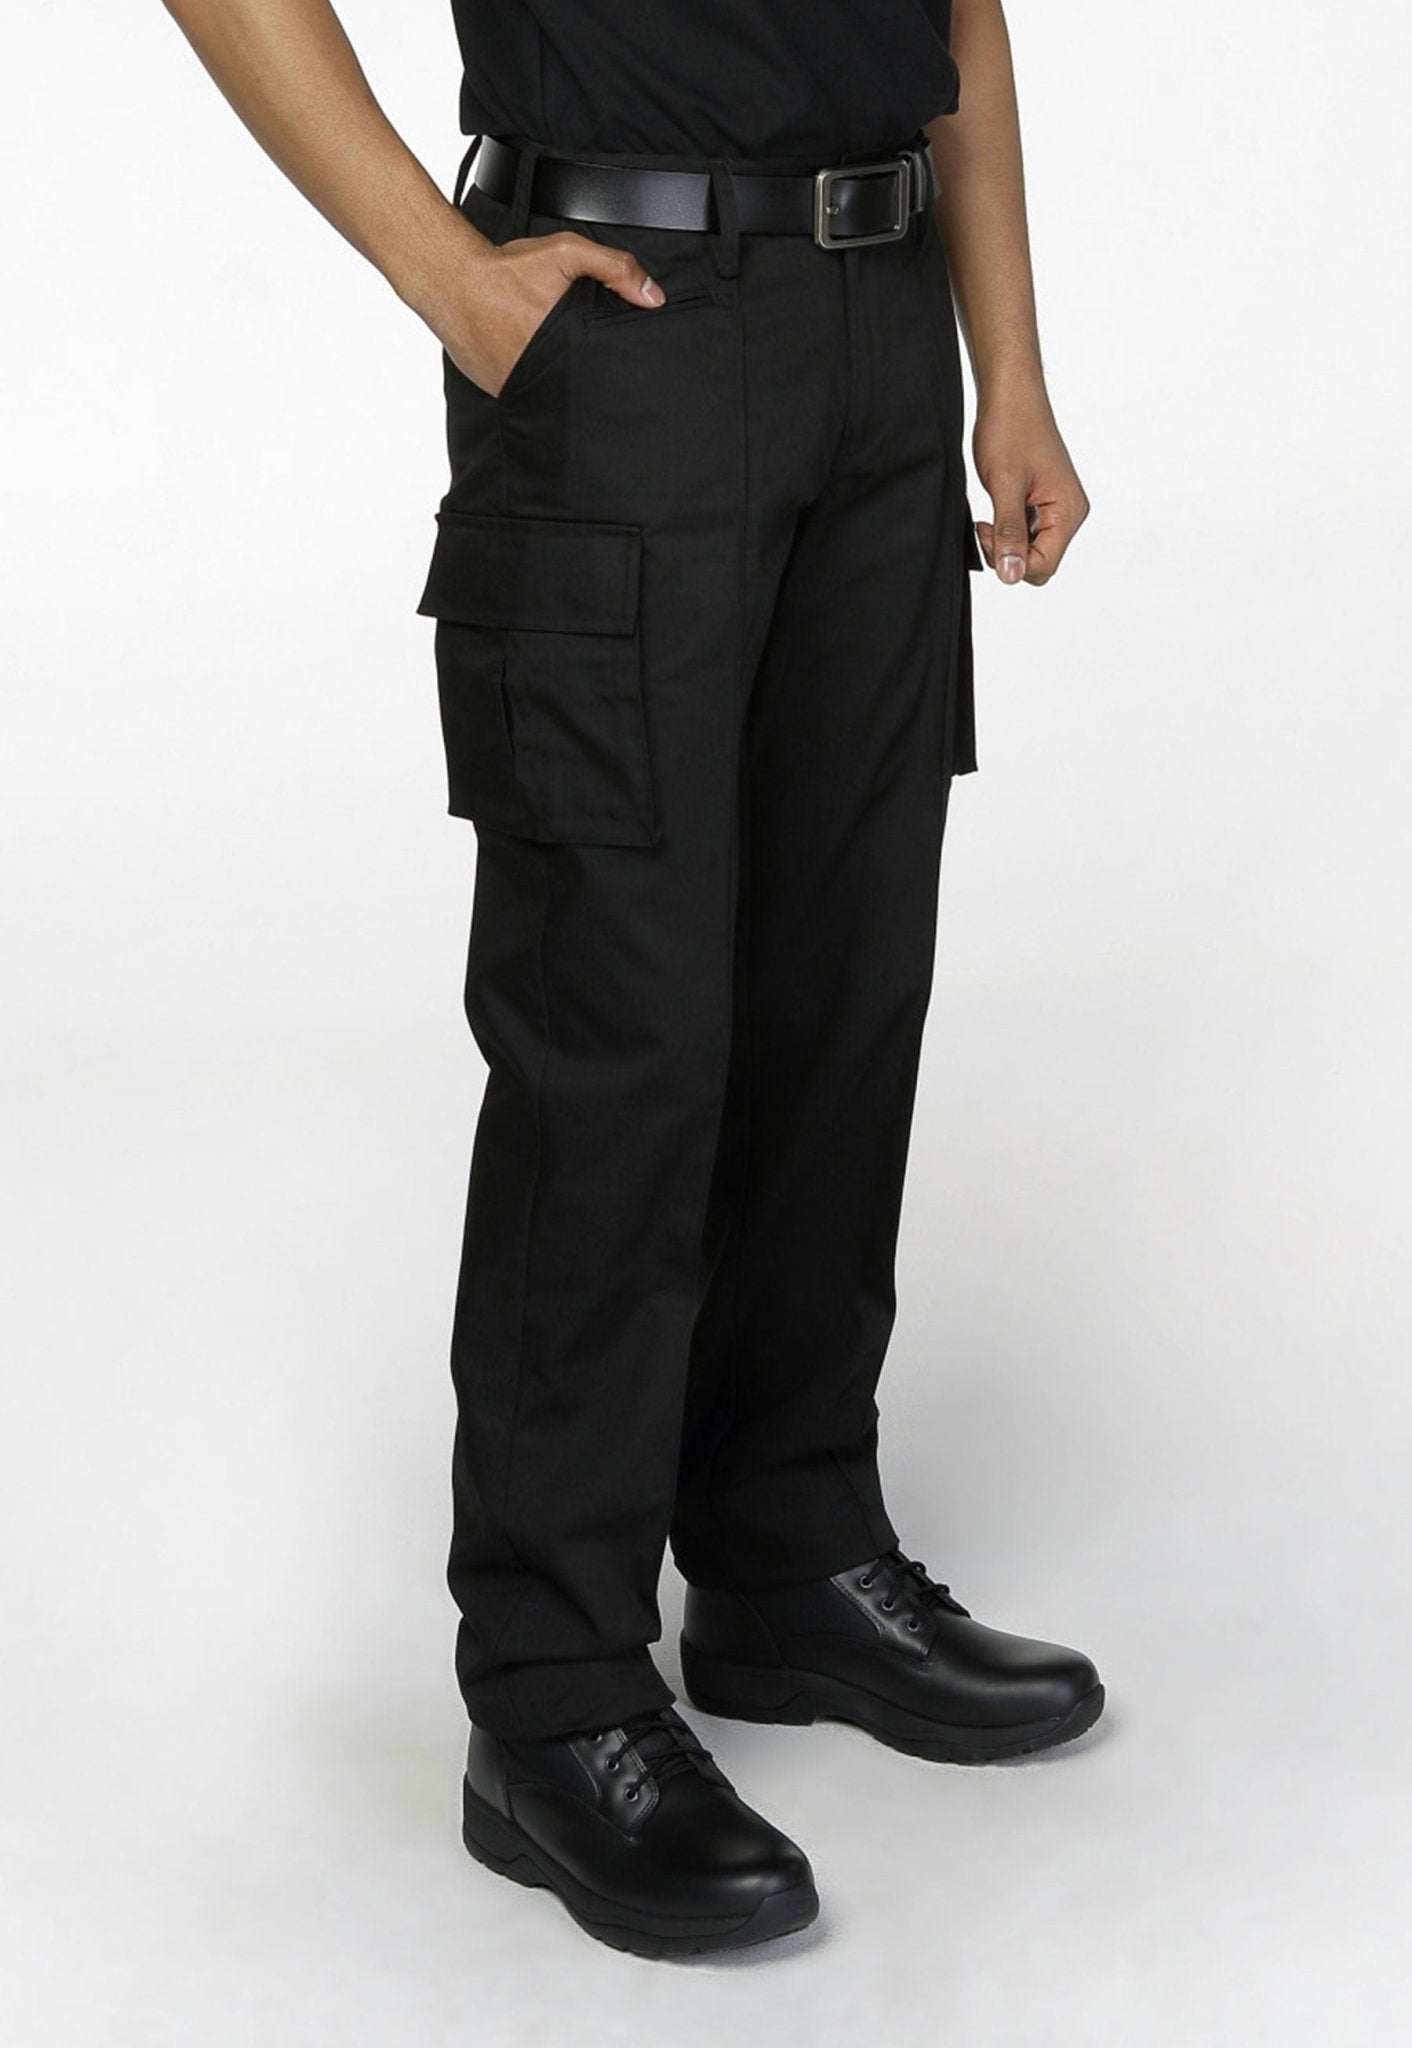 Work Cargo PantsSecurity  High Visibility Clothing and Security Uniforms   Domtex Apparel